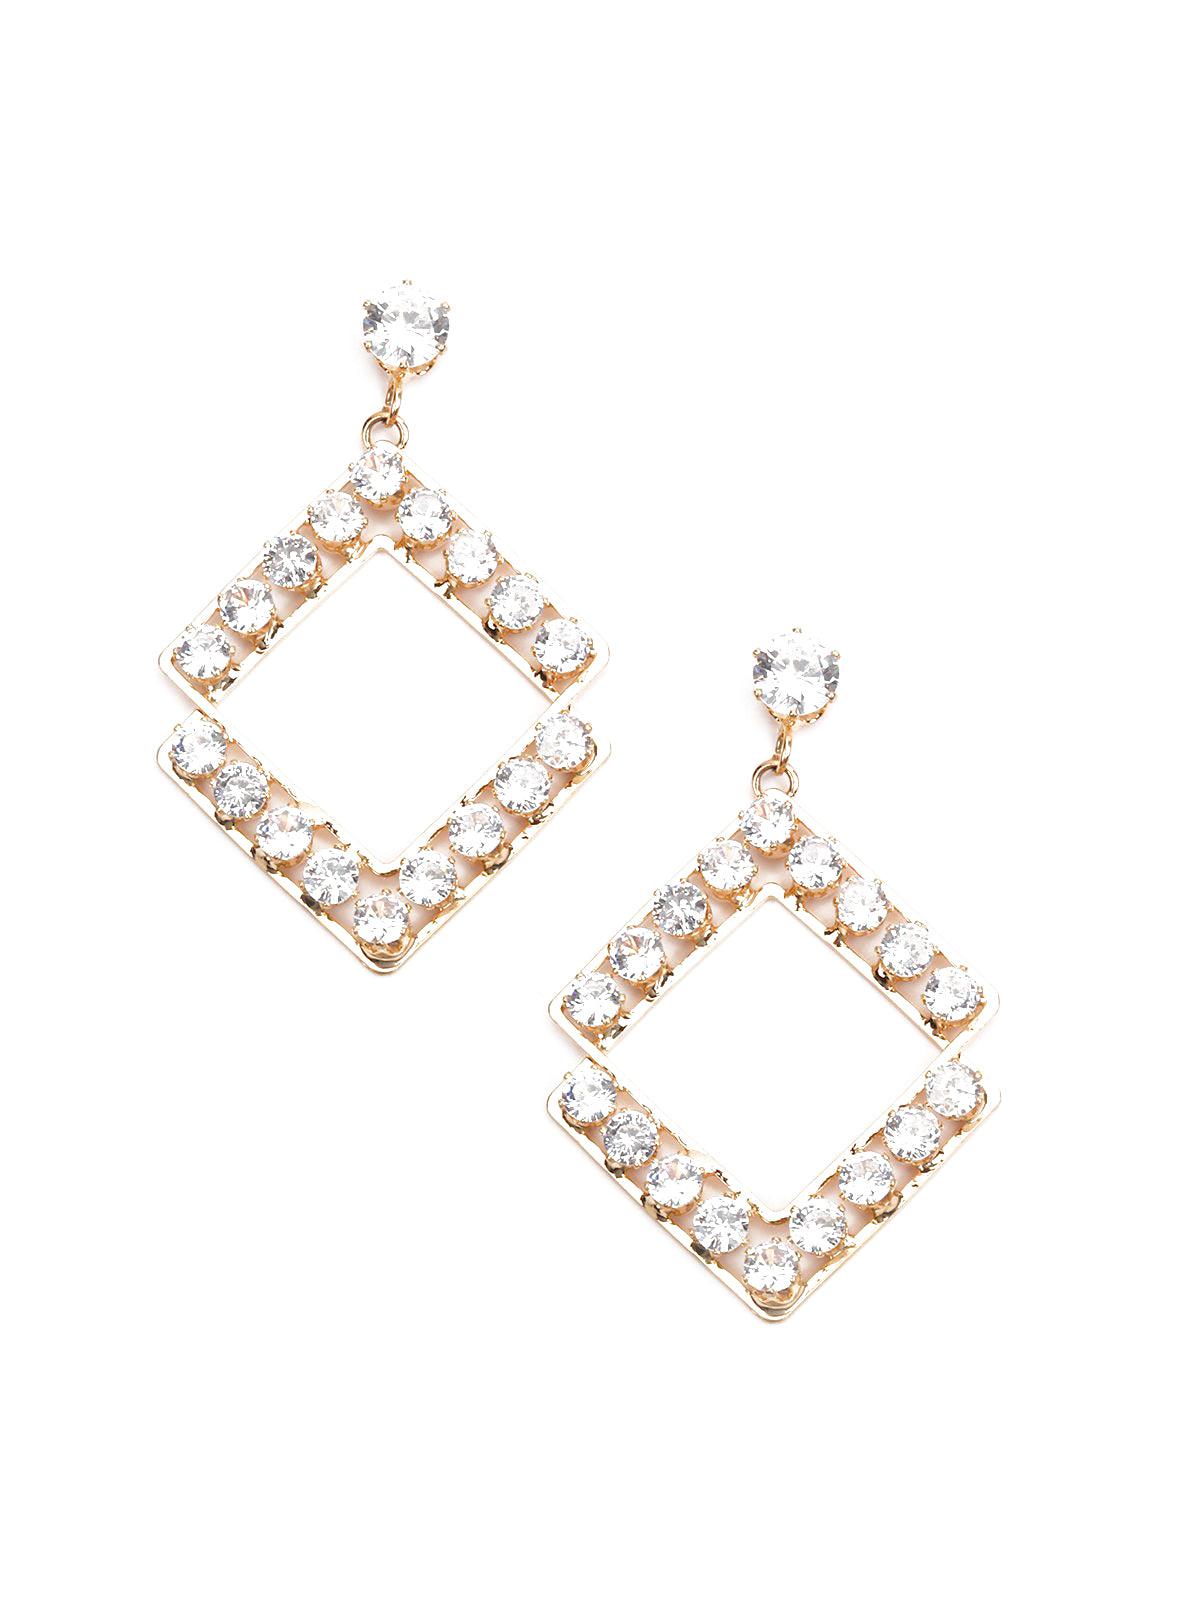 Women's Classy Square Earring With Stones - Odette